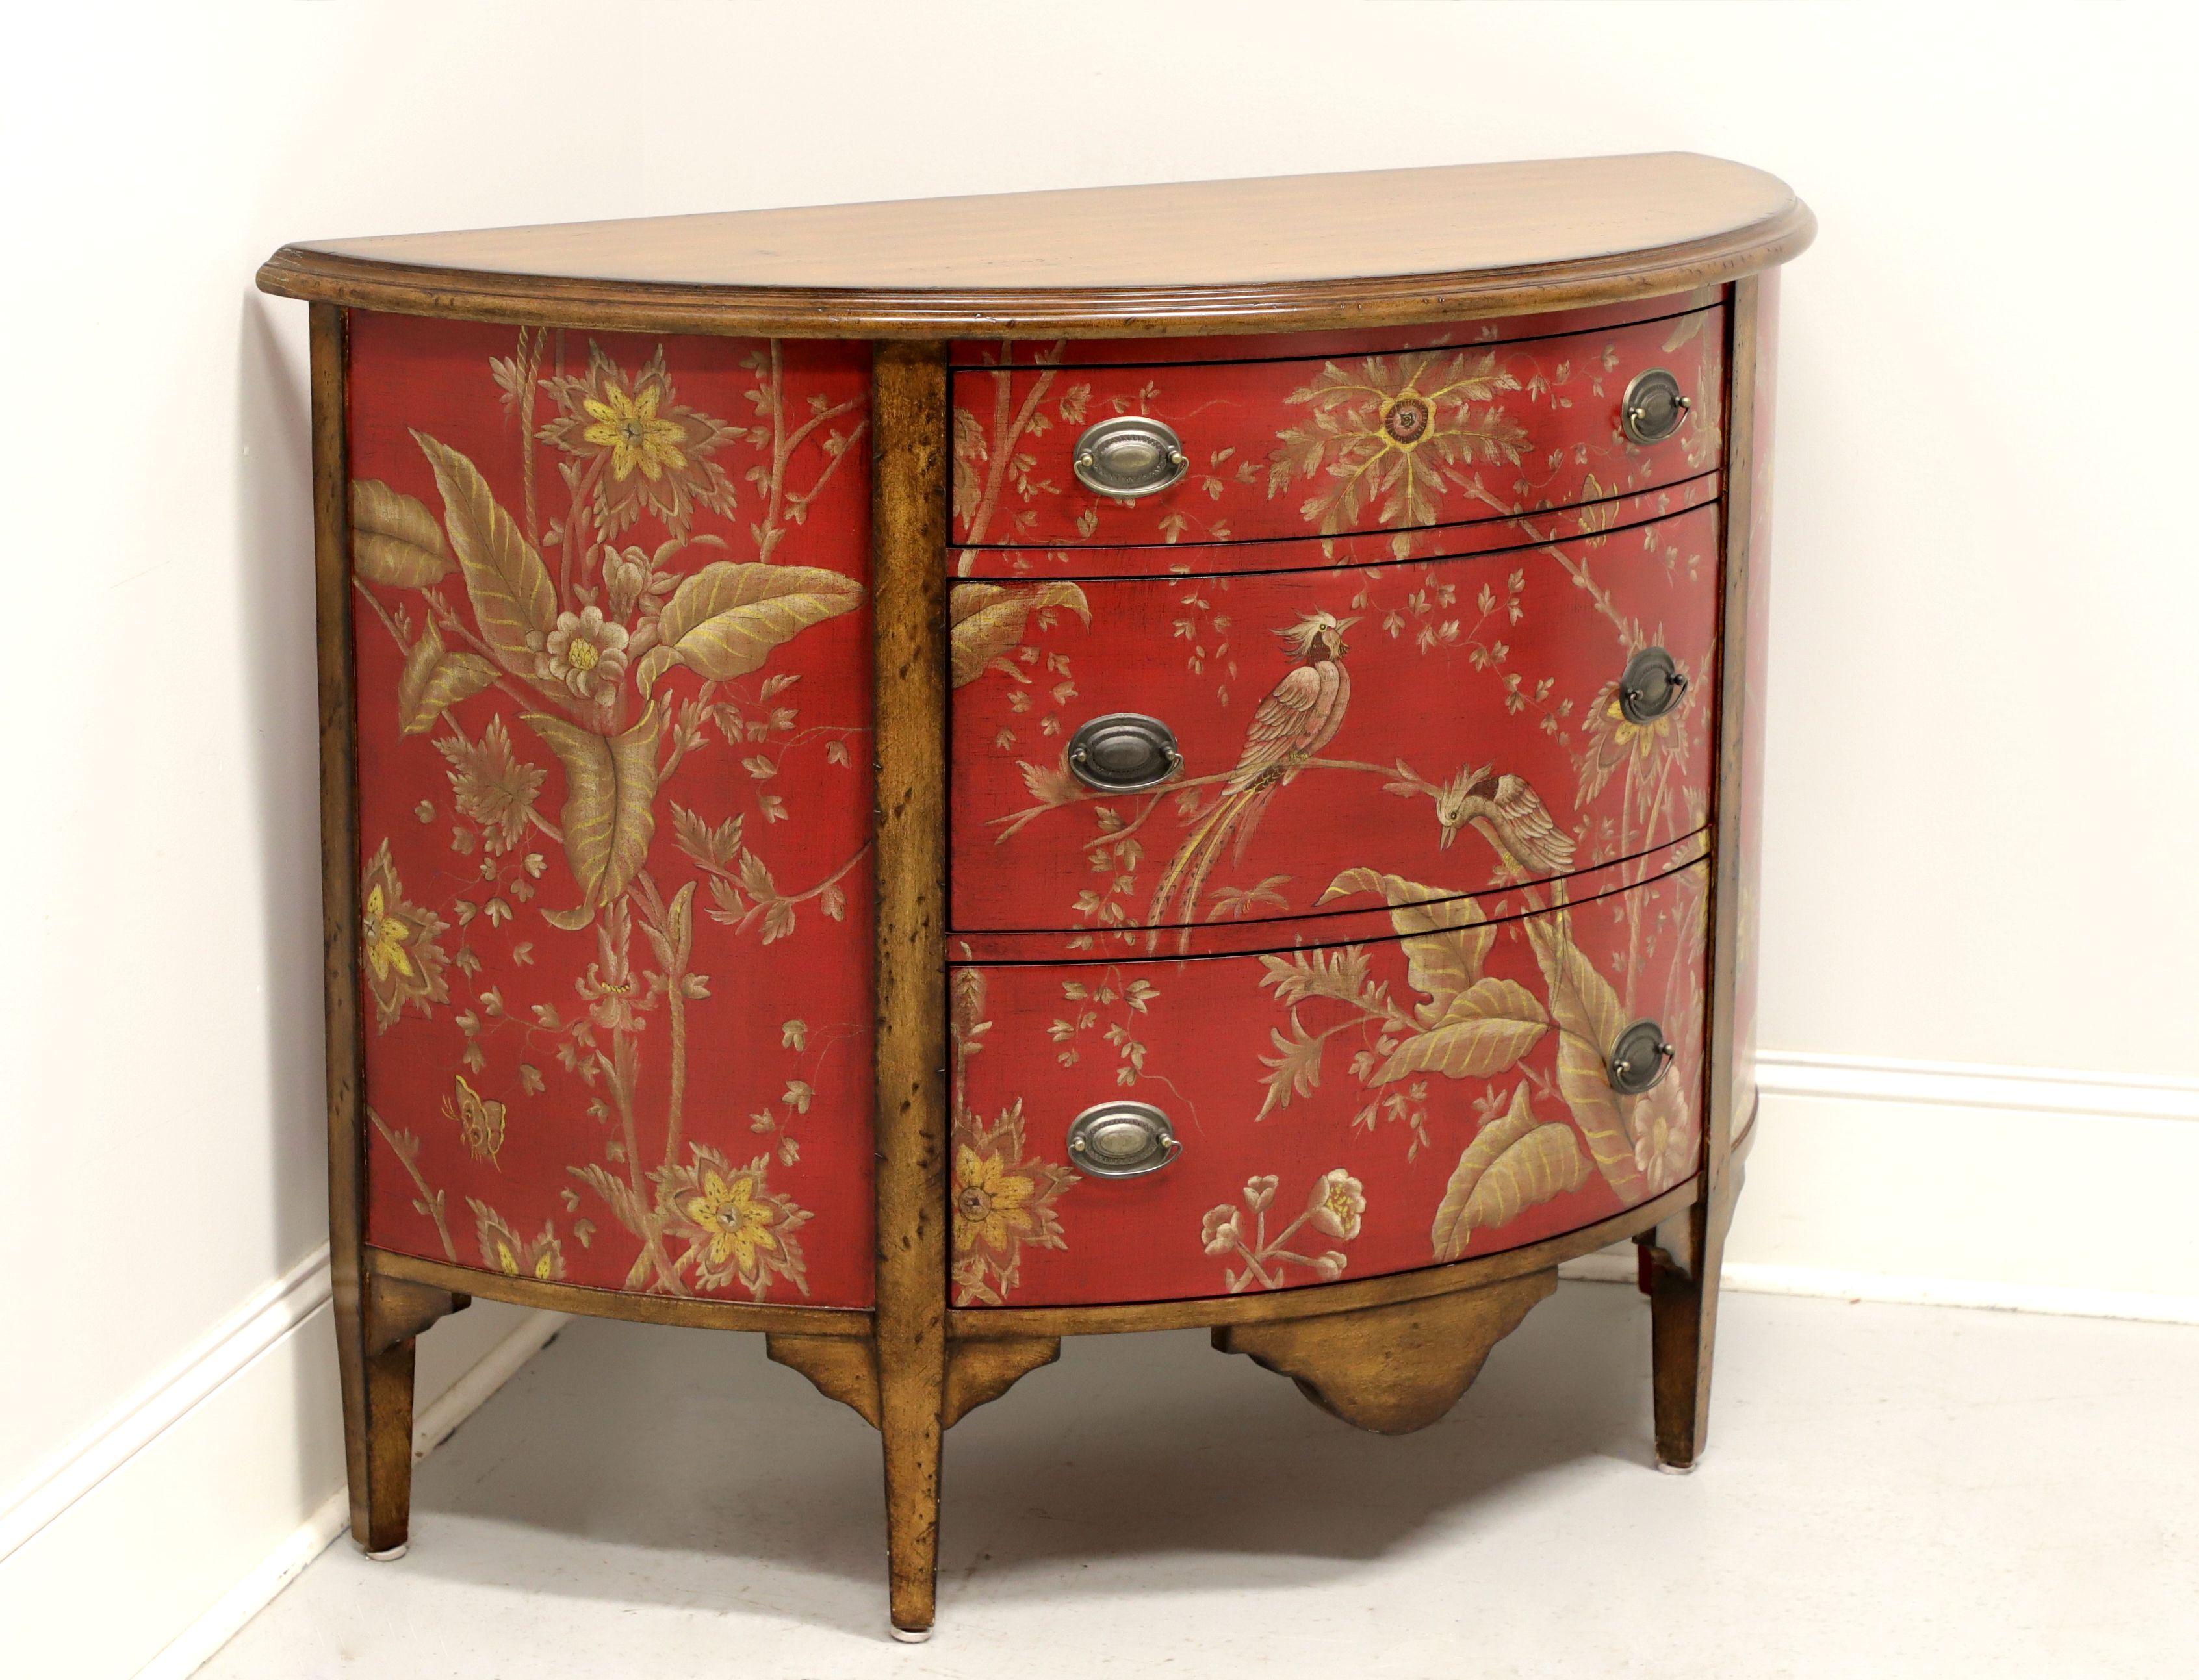 A Contemporary style demilune commode chest, unbranded. Slightly distressed walnut, drawer fronts & side panels painted red with hand painted avian & foliate themes, brass hardware and bracketed tapered legs. Features one smaller over two larger